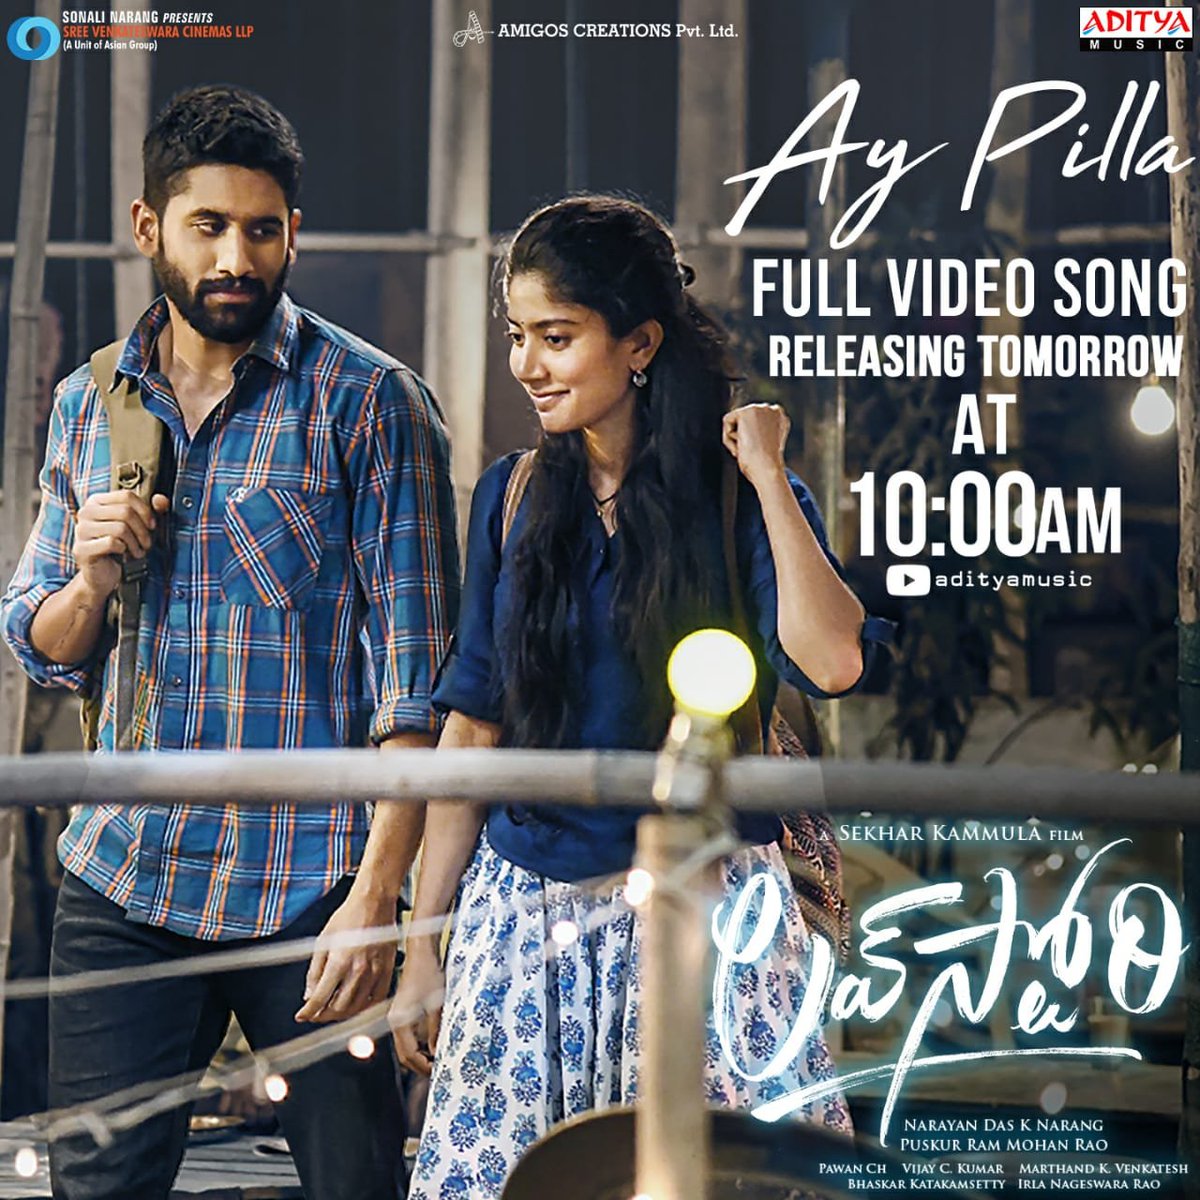 #AyPilla full video song from #LoveStory will be out tomorrow at 10 am